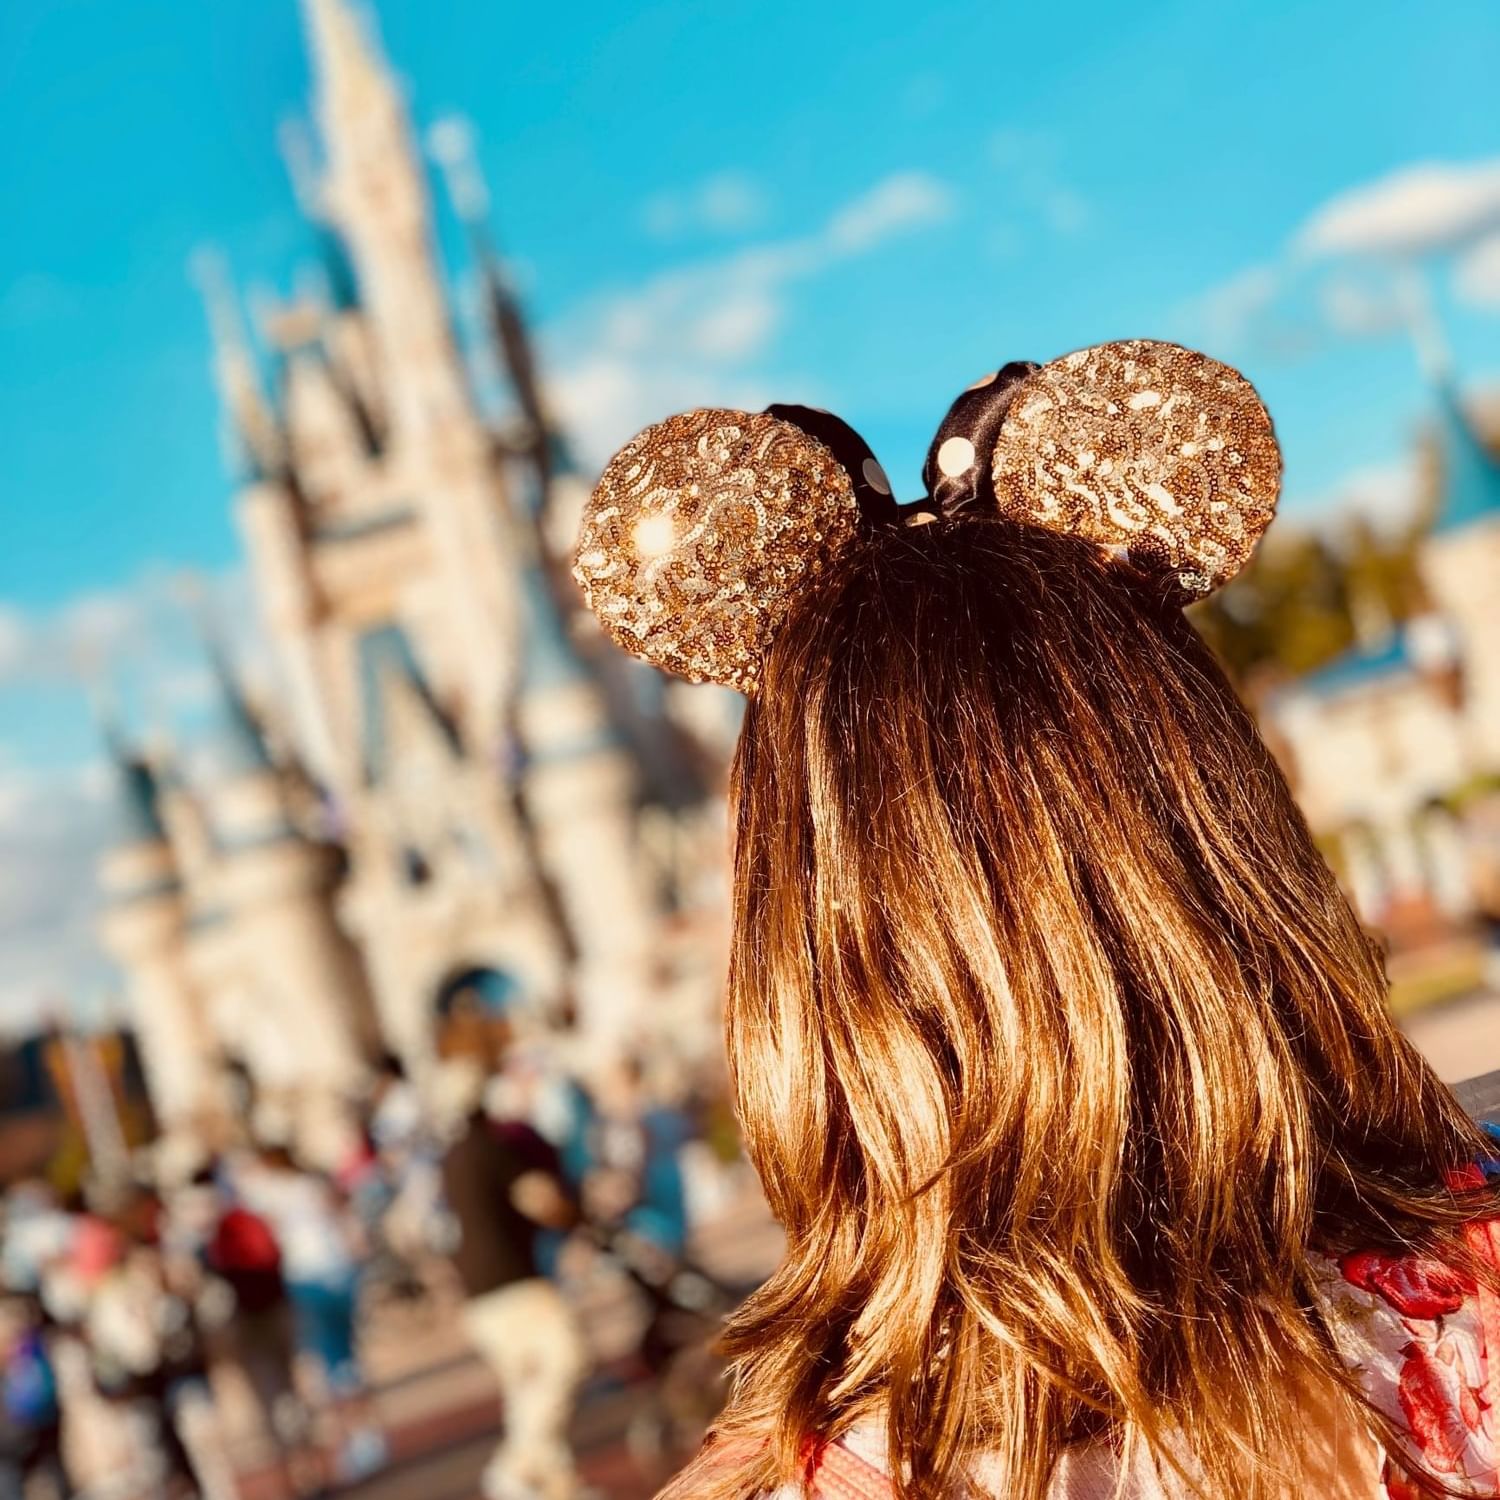 A Girl with Disney ears in front Disneyland near DOT Hotels